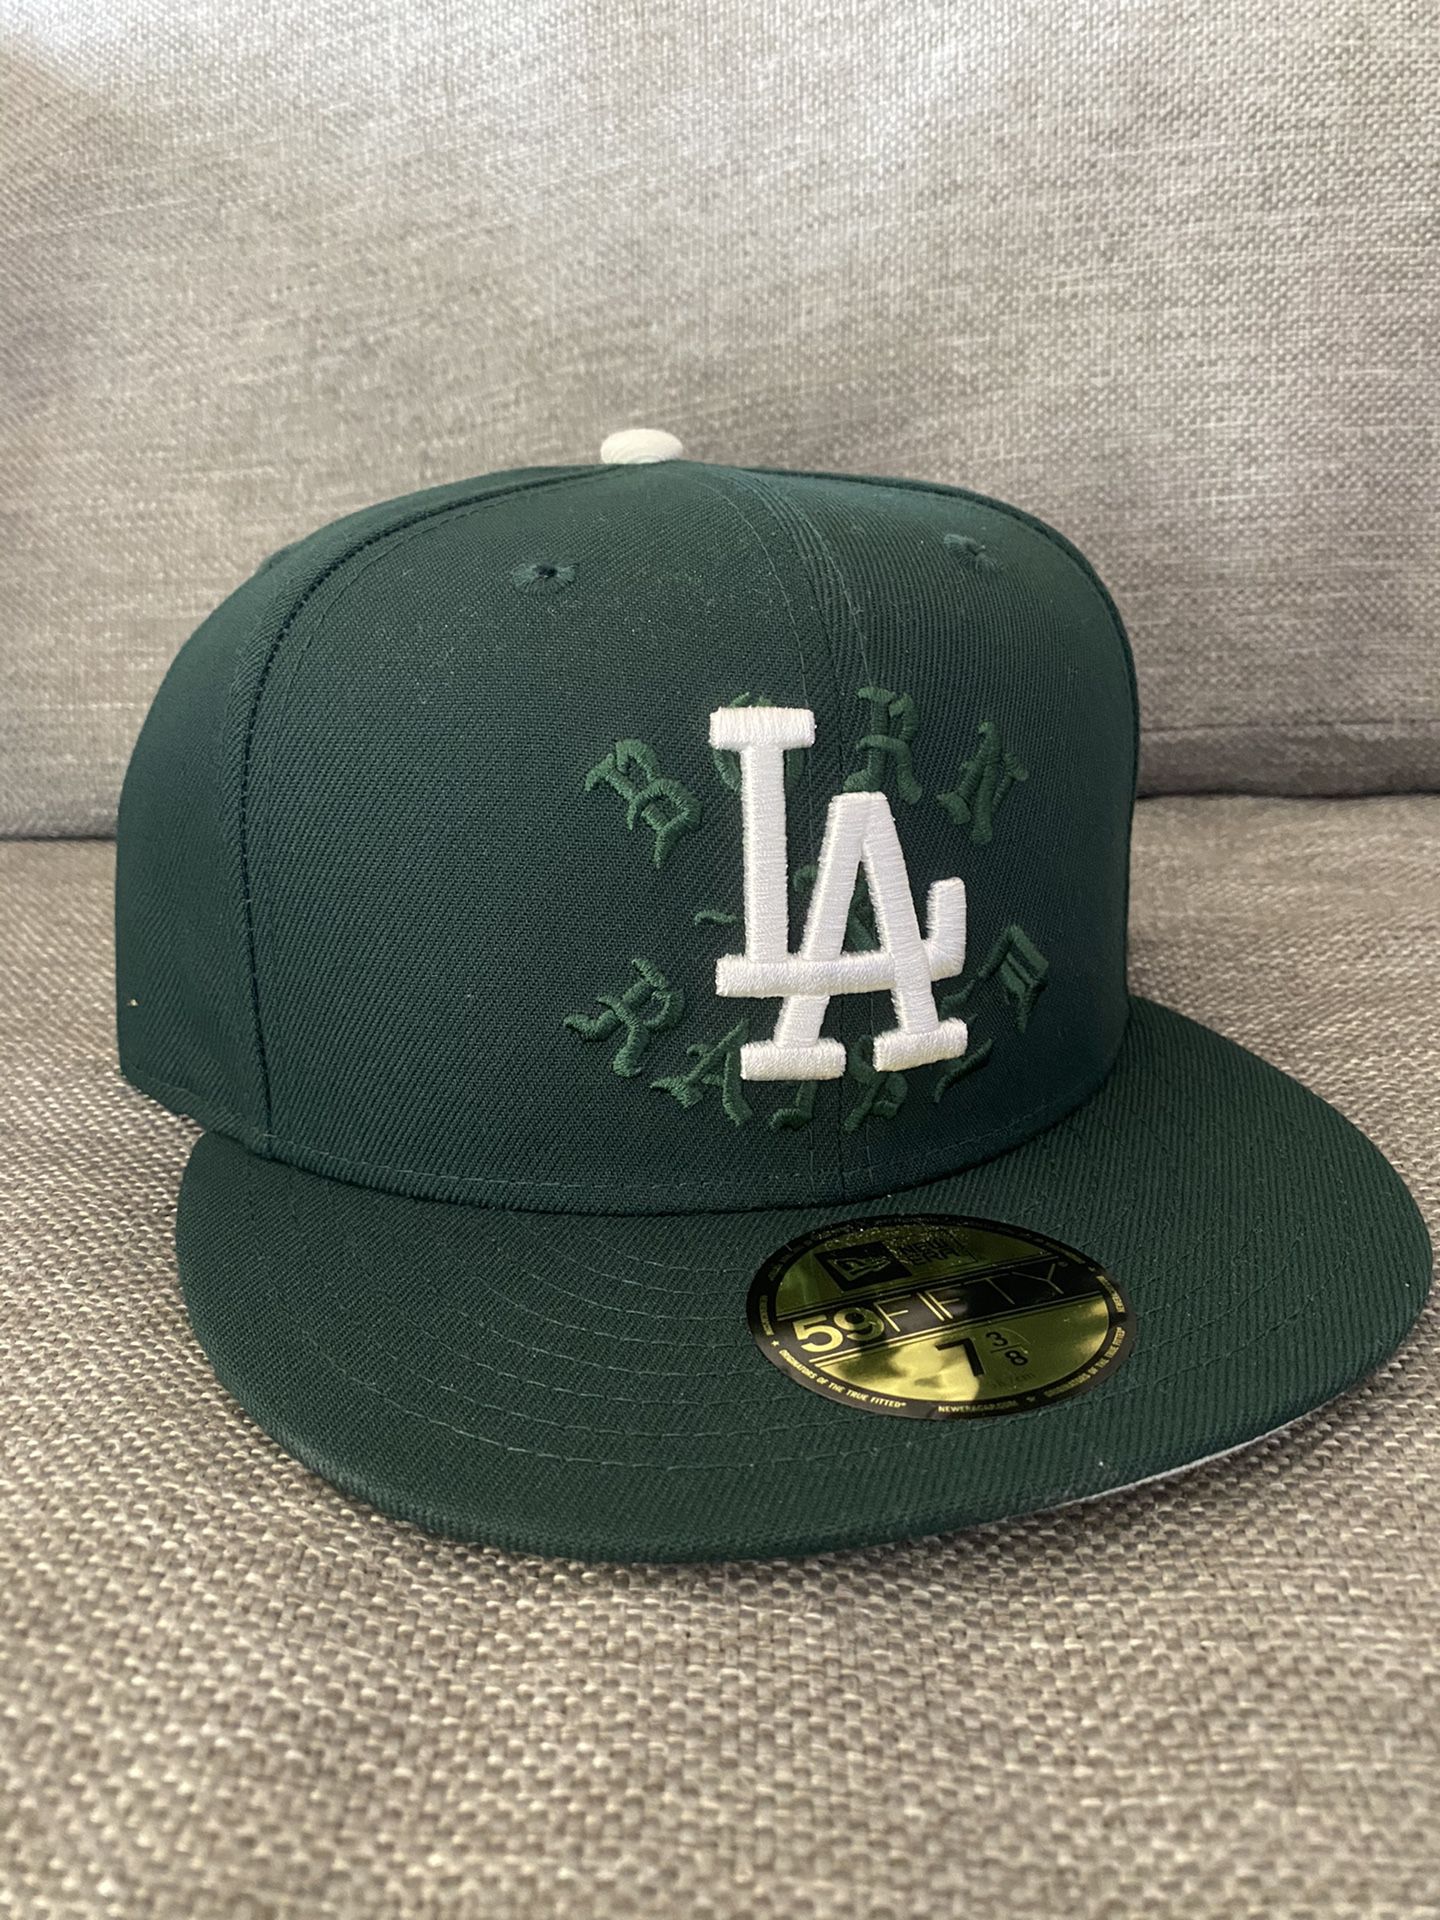 Born Raised New Era Los Angeles Dodgers Hat 7 3/8 for Sale in